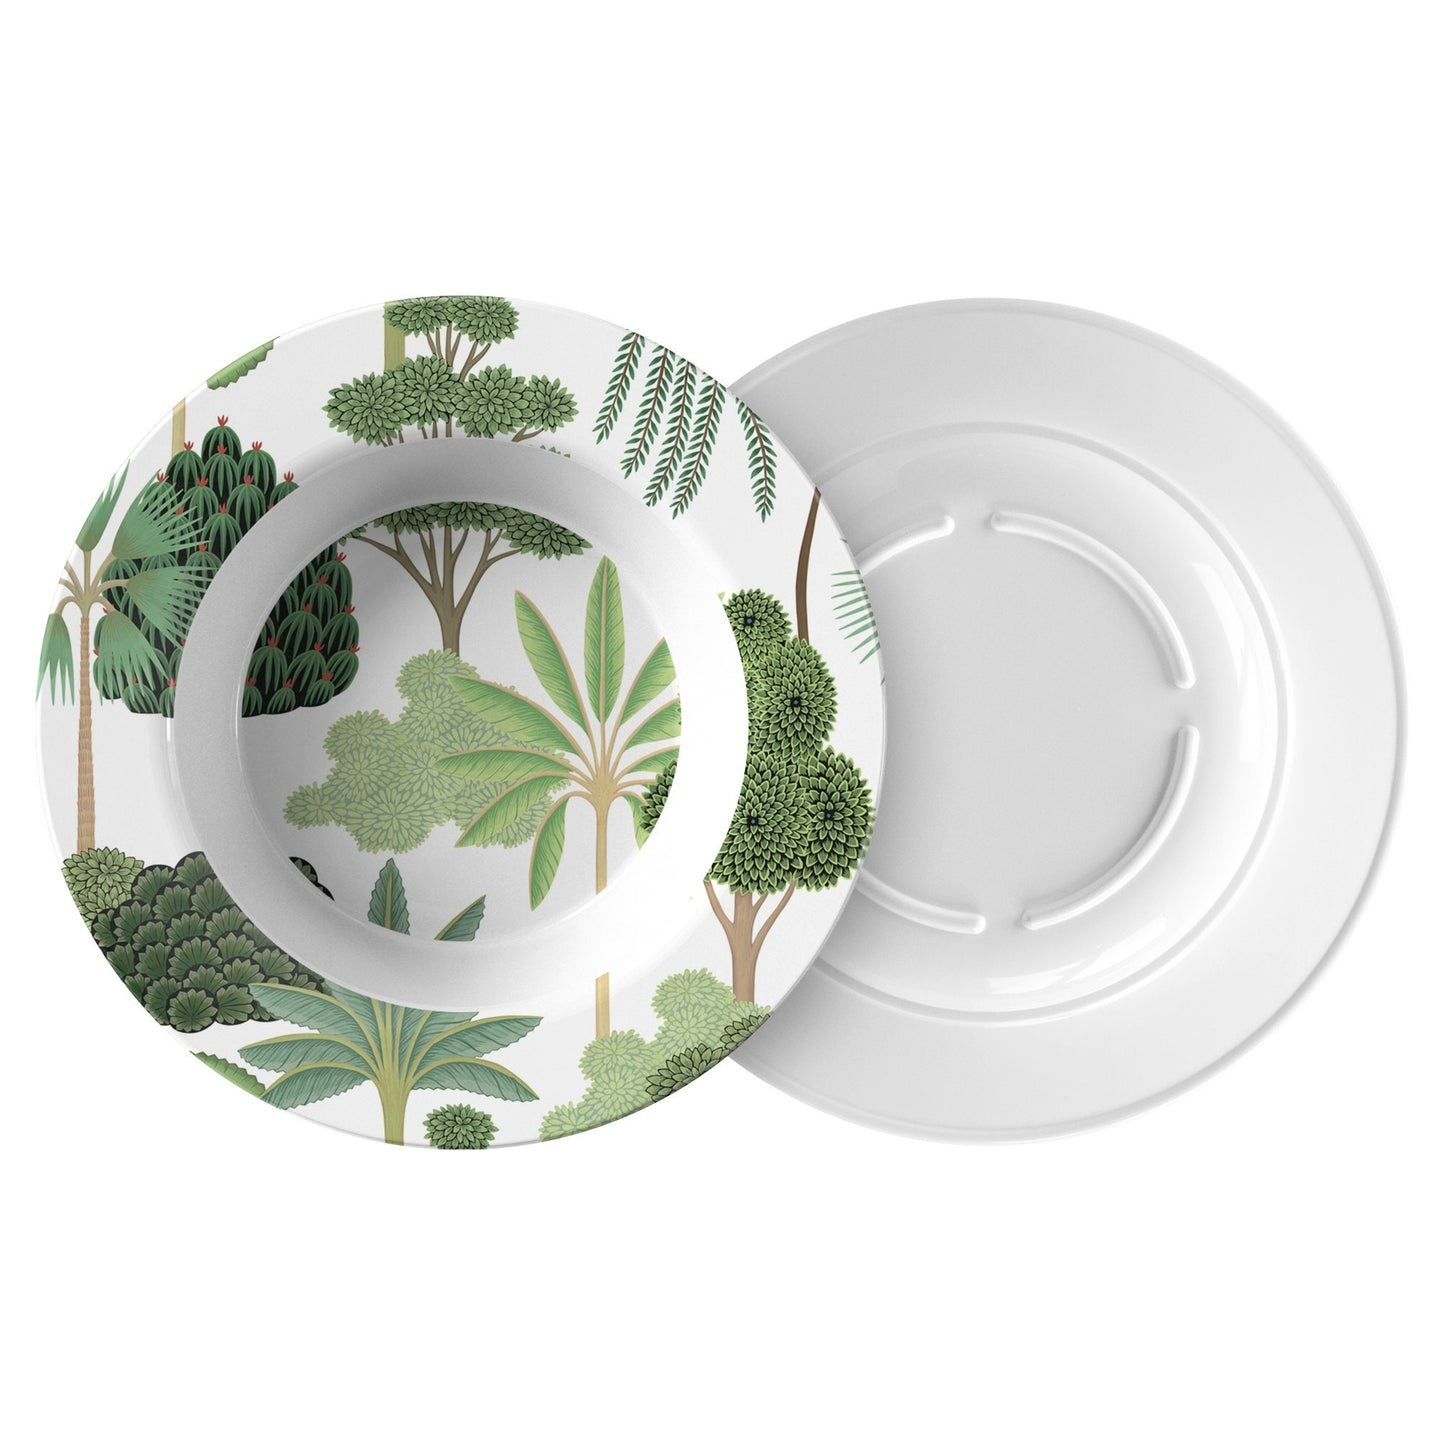 Tropical Trees Bowl, Set of 4, White and Green, Mughal Gardens, Luxury Thermosaf Plastic